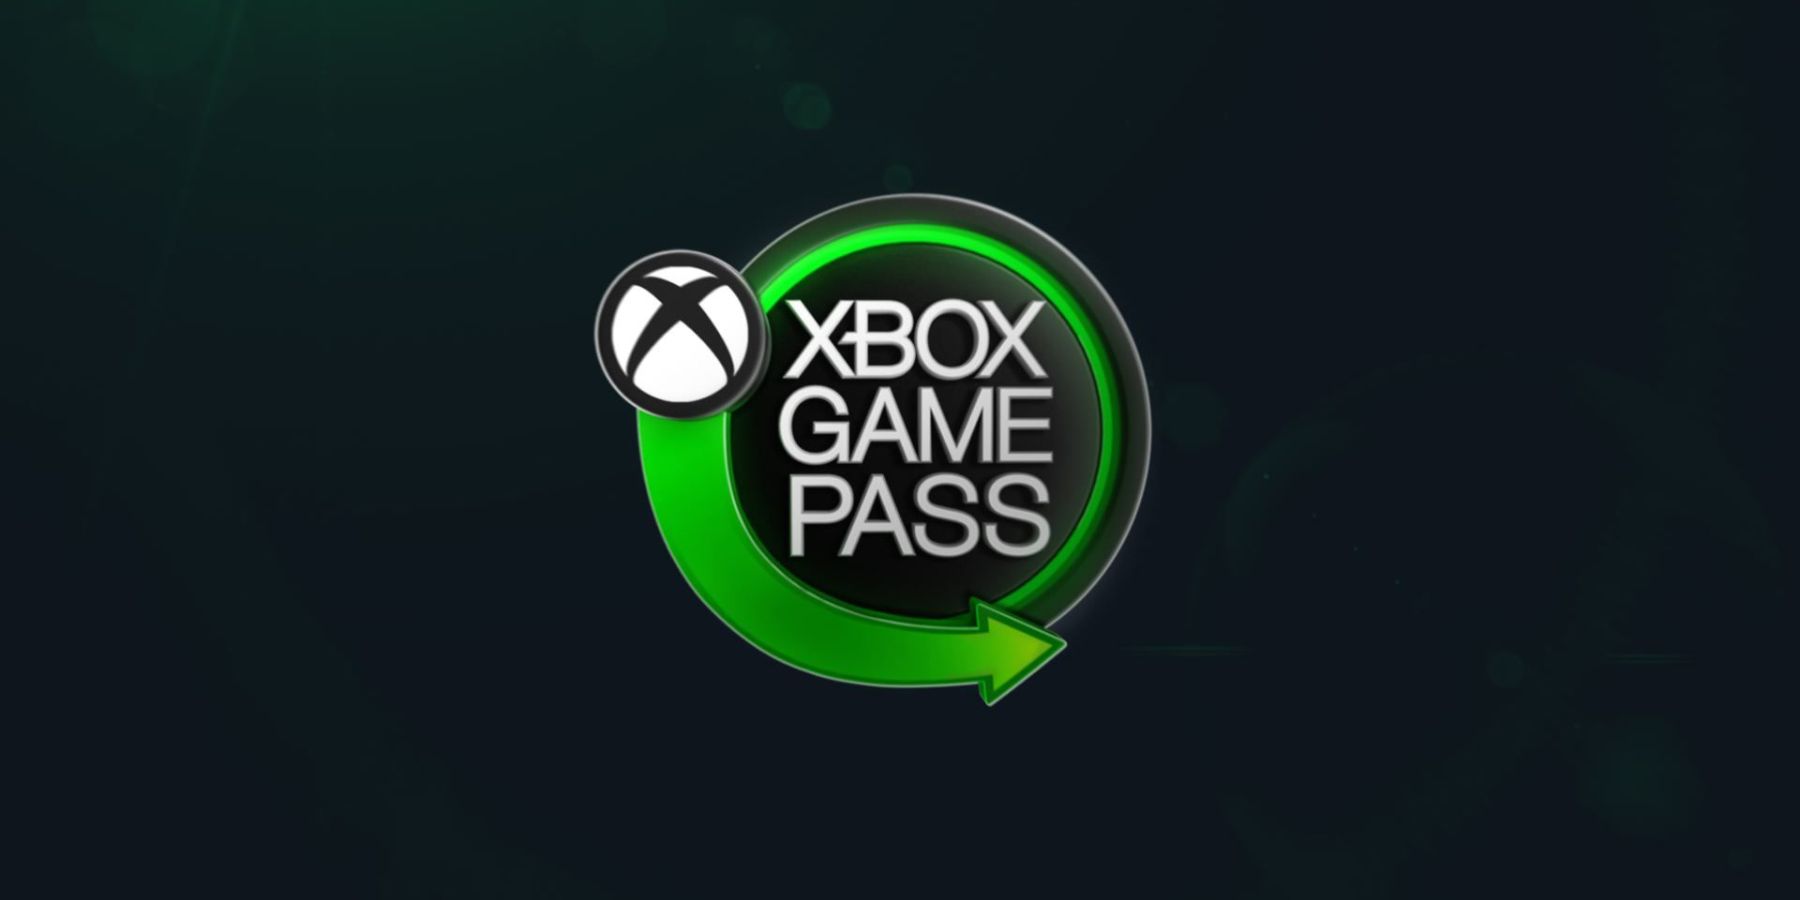 Prices and features of Xbox Game Pass